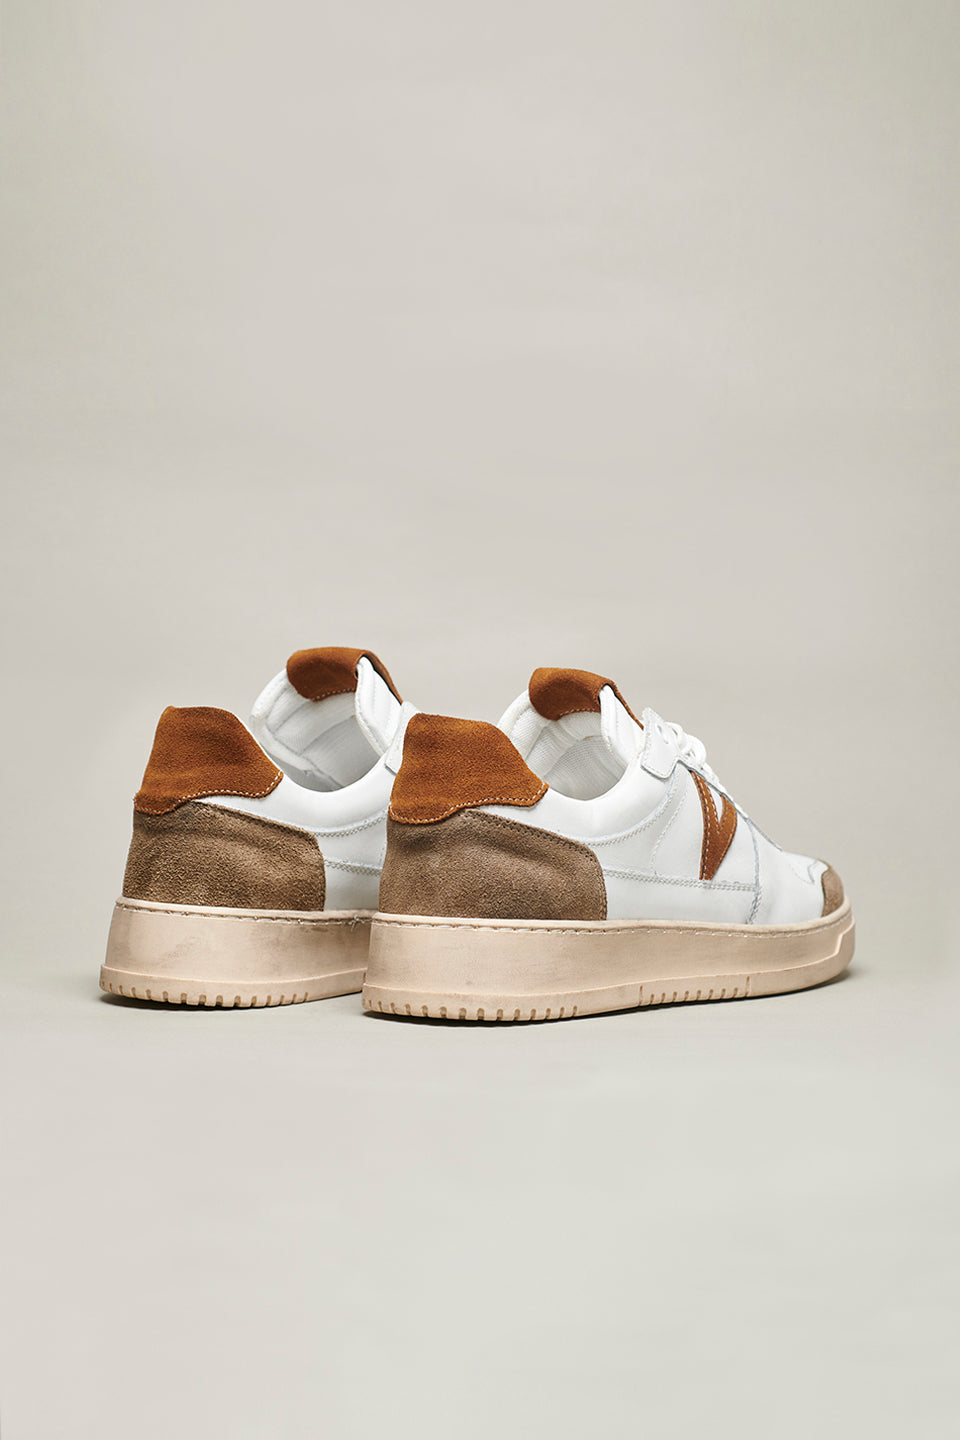 COLLEGE - White sneakers with Camel suede back and insert